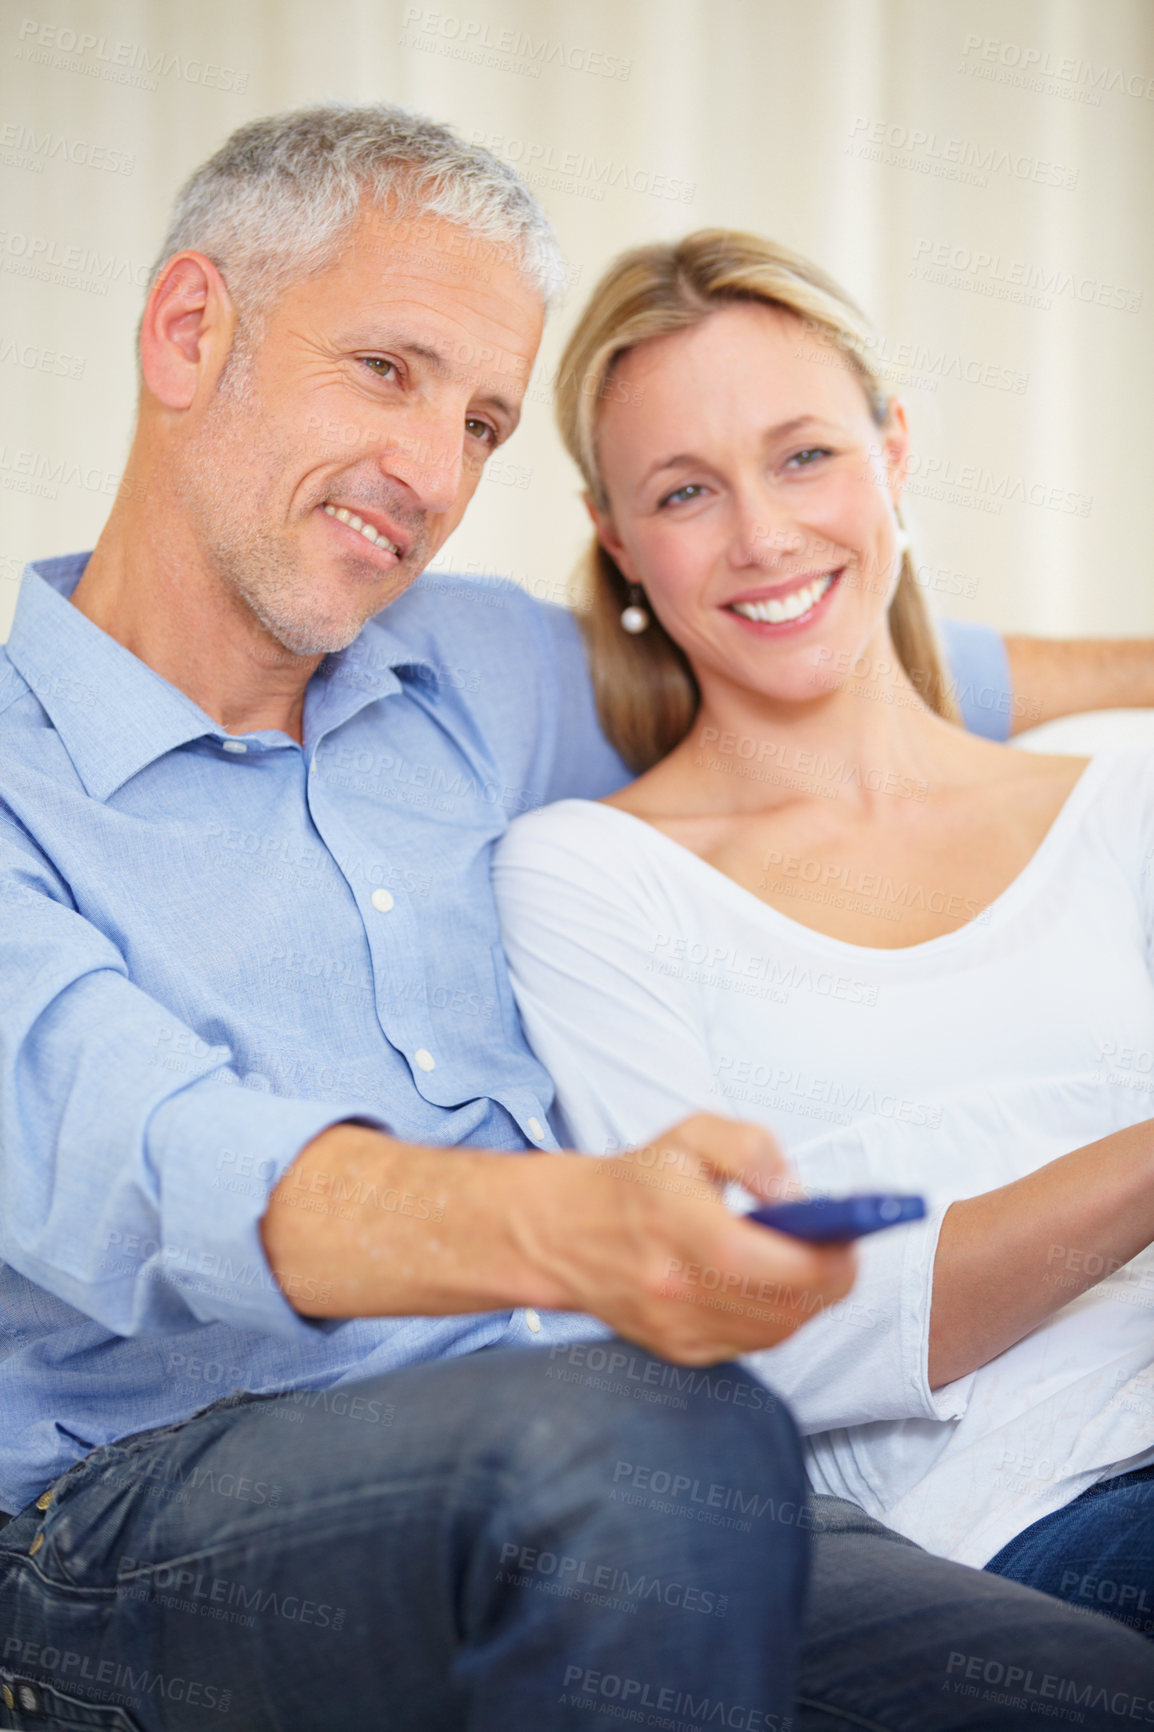 Buy stock photo Cropped shot of an affectionate mature couple